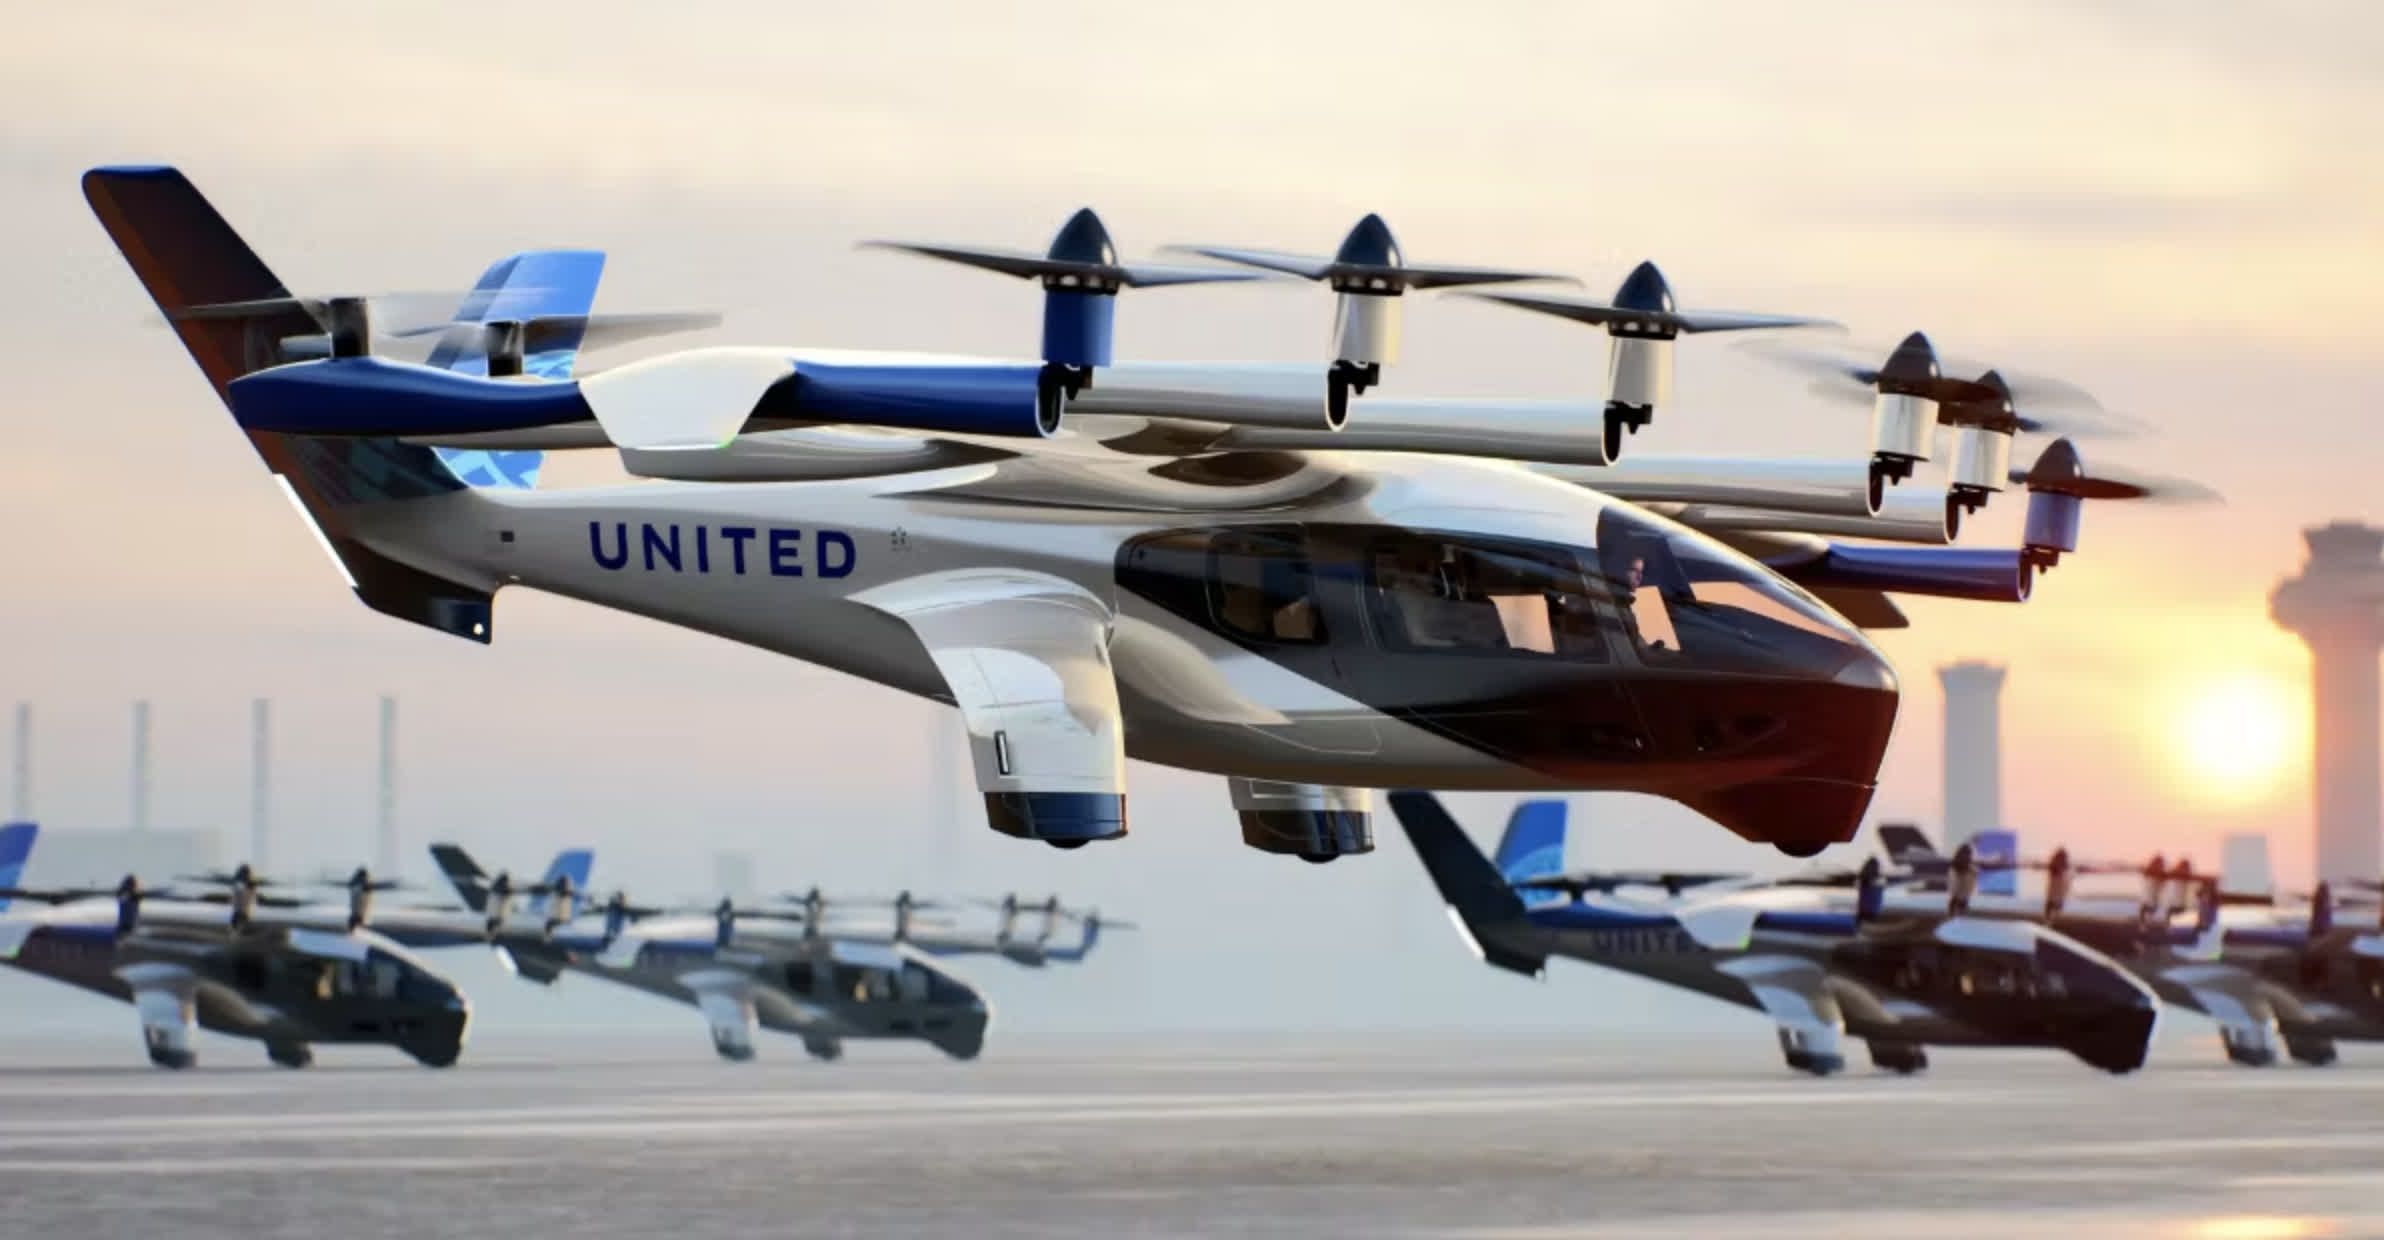 Electric air taxis are coming to Chicago, courtesy of United Airlines